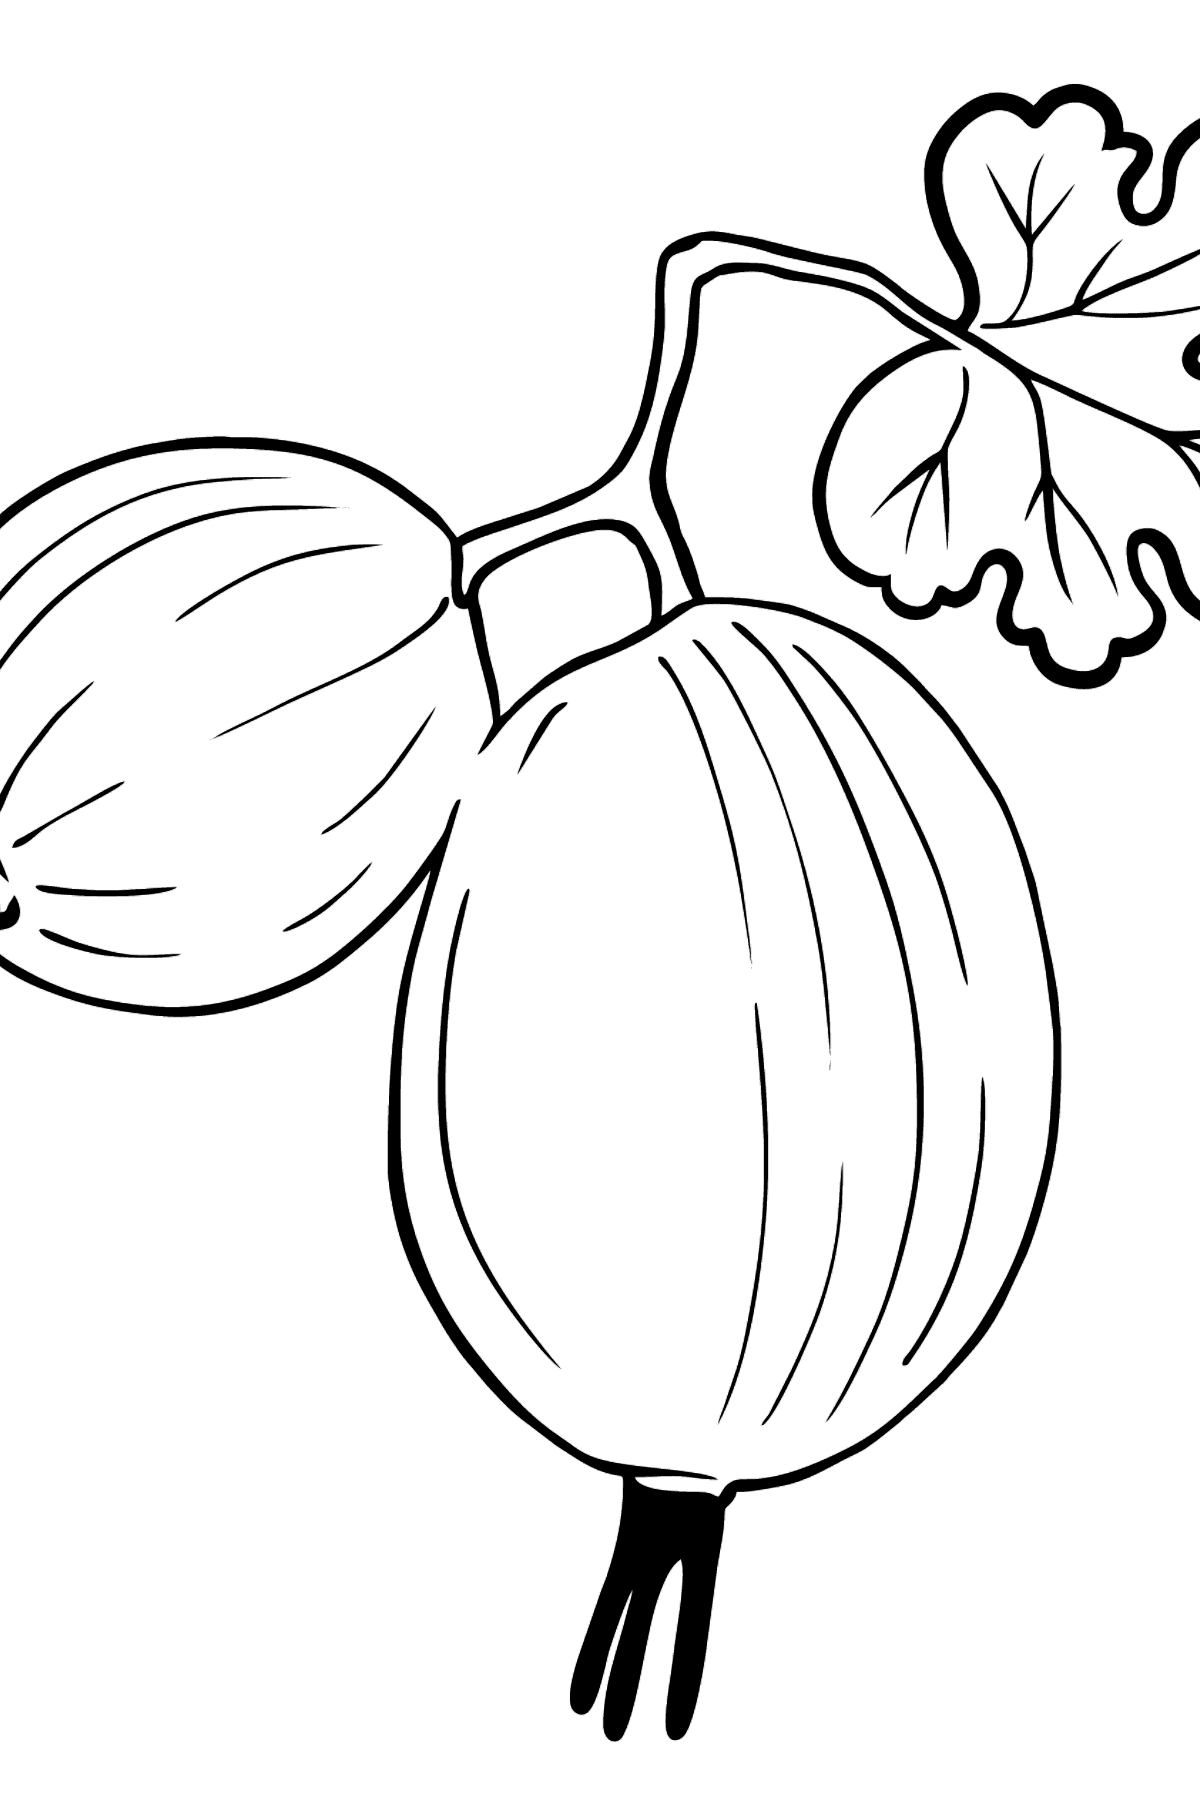 Gooseberry coloring page - Coloring Pages for Kids